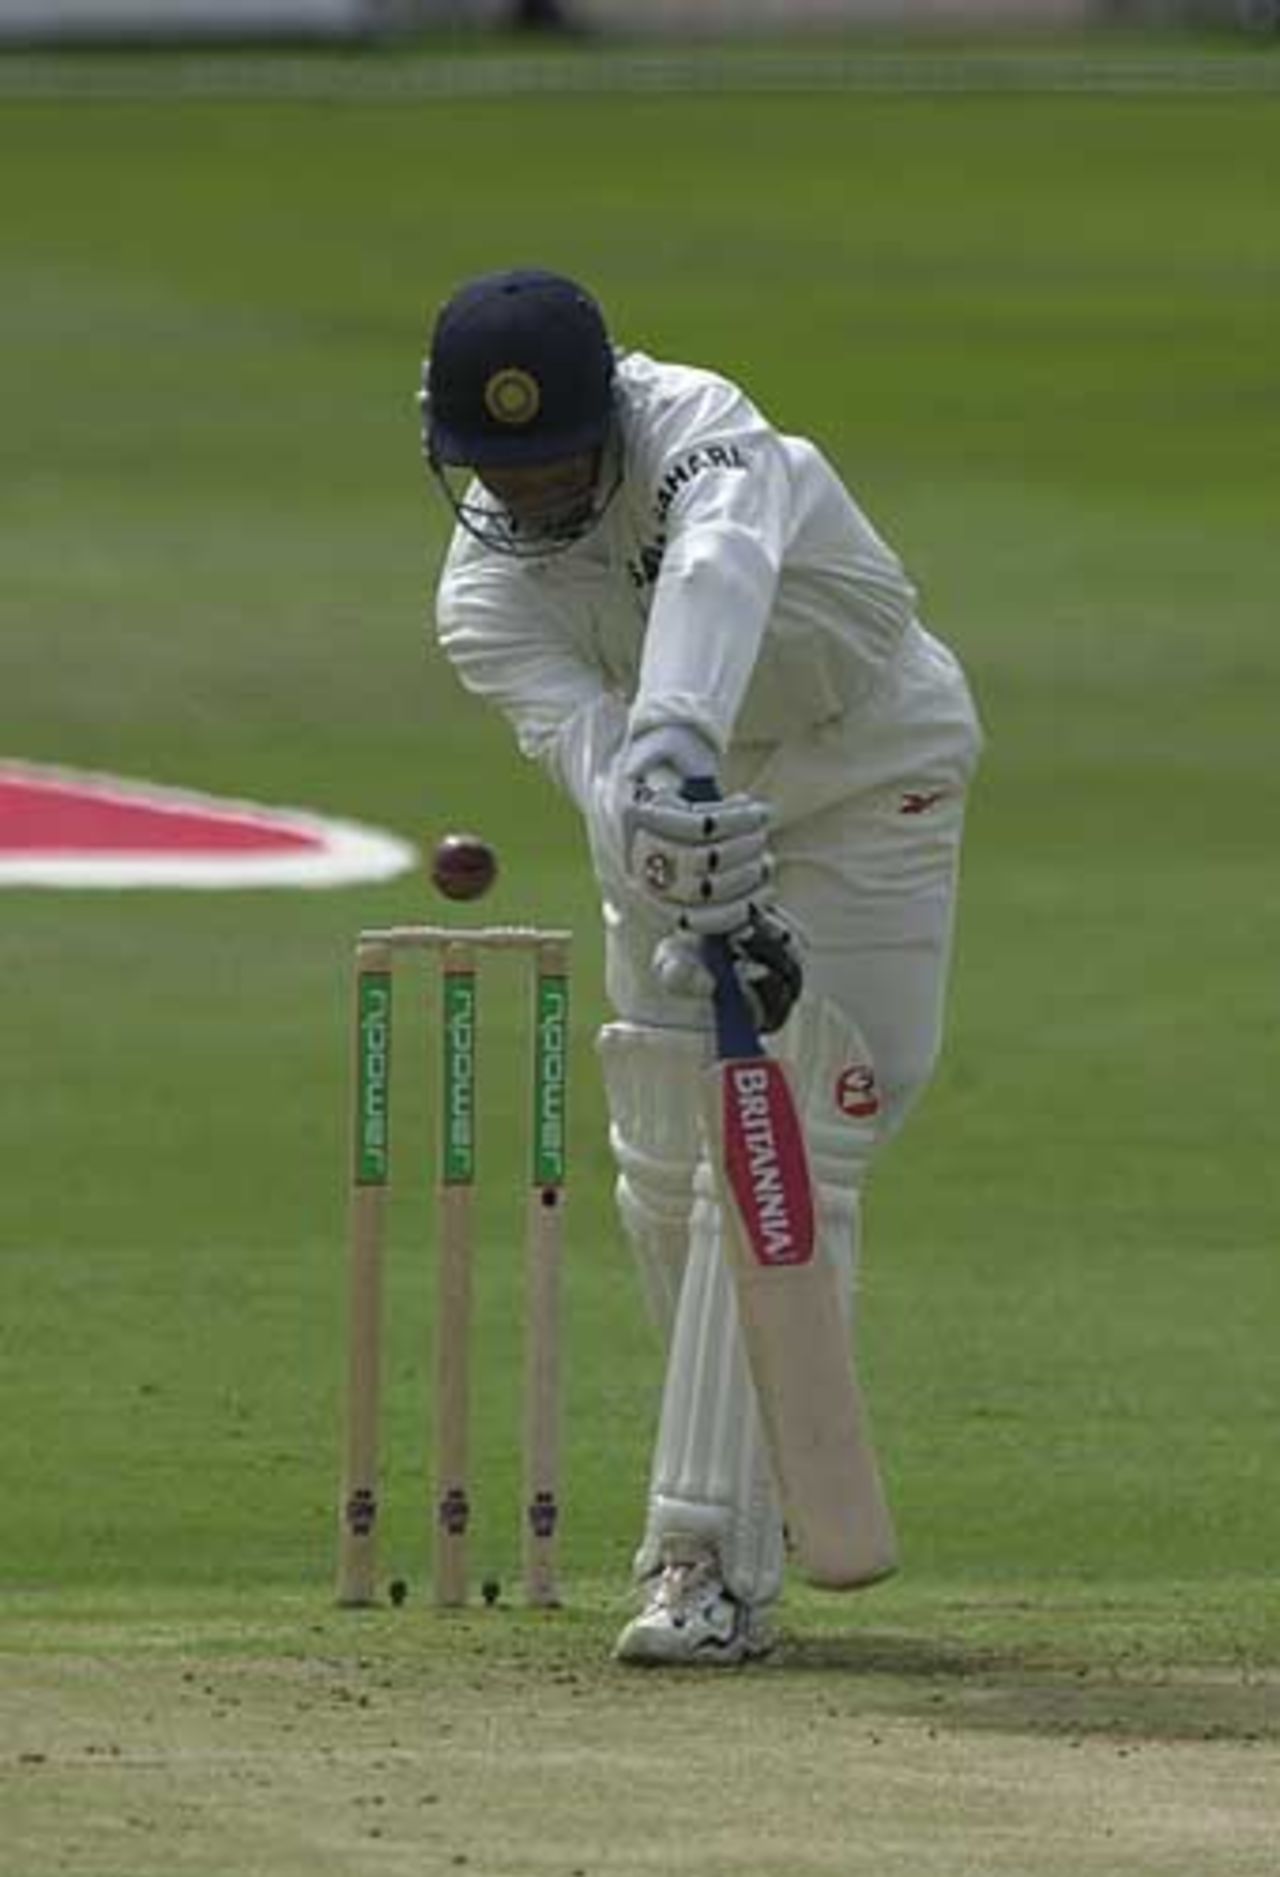 Rahul Dravid see a ball from Hoggard whistle over middle stump, 2nd npower Test at Trent Bridge, August 2002